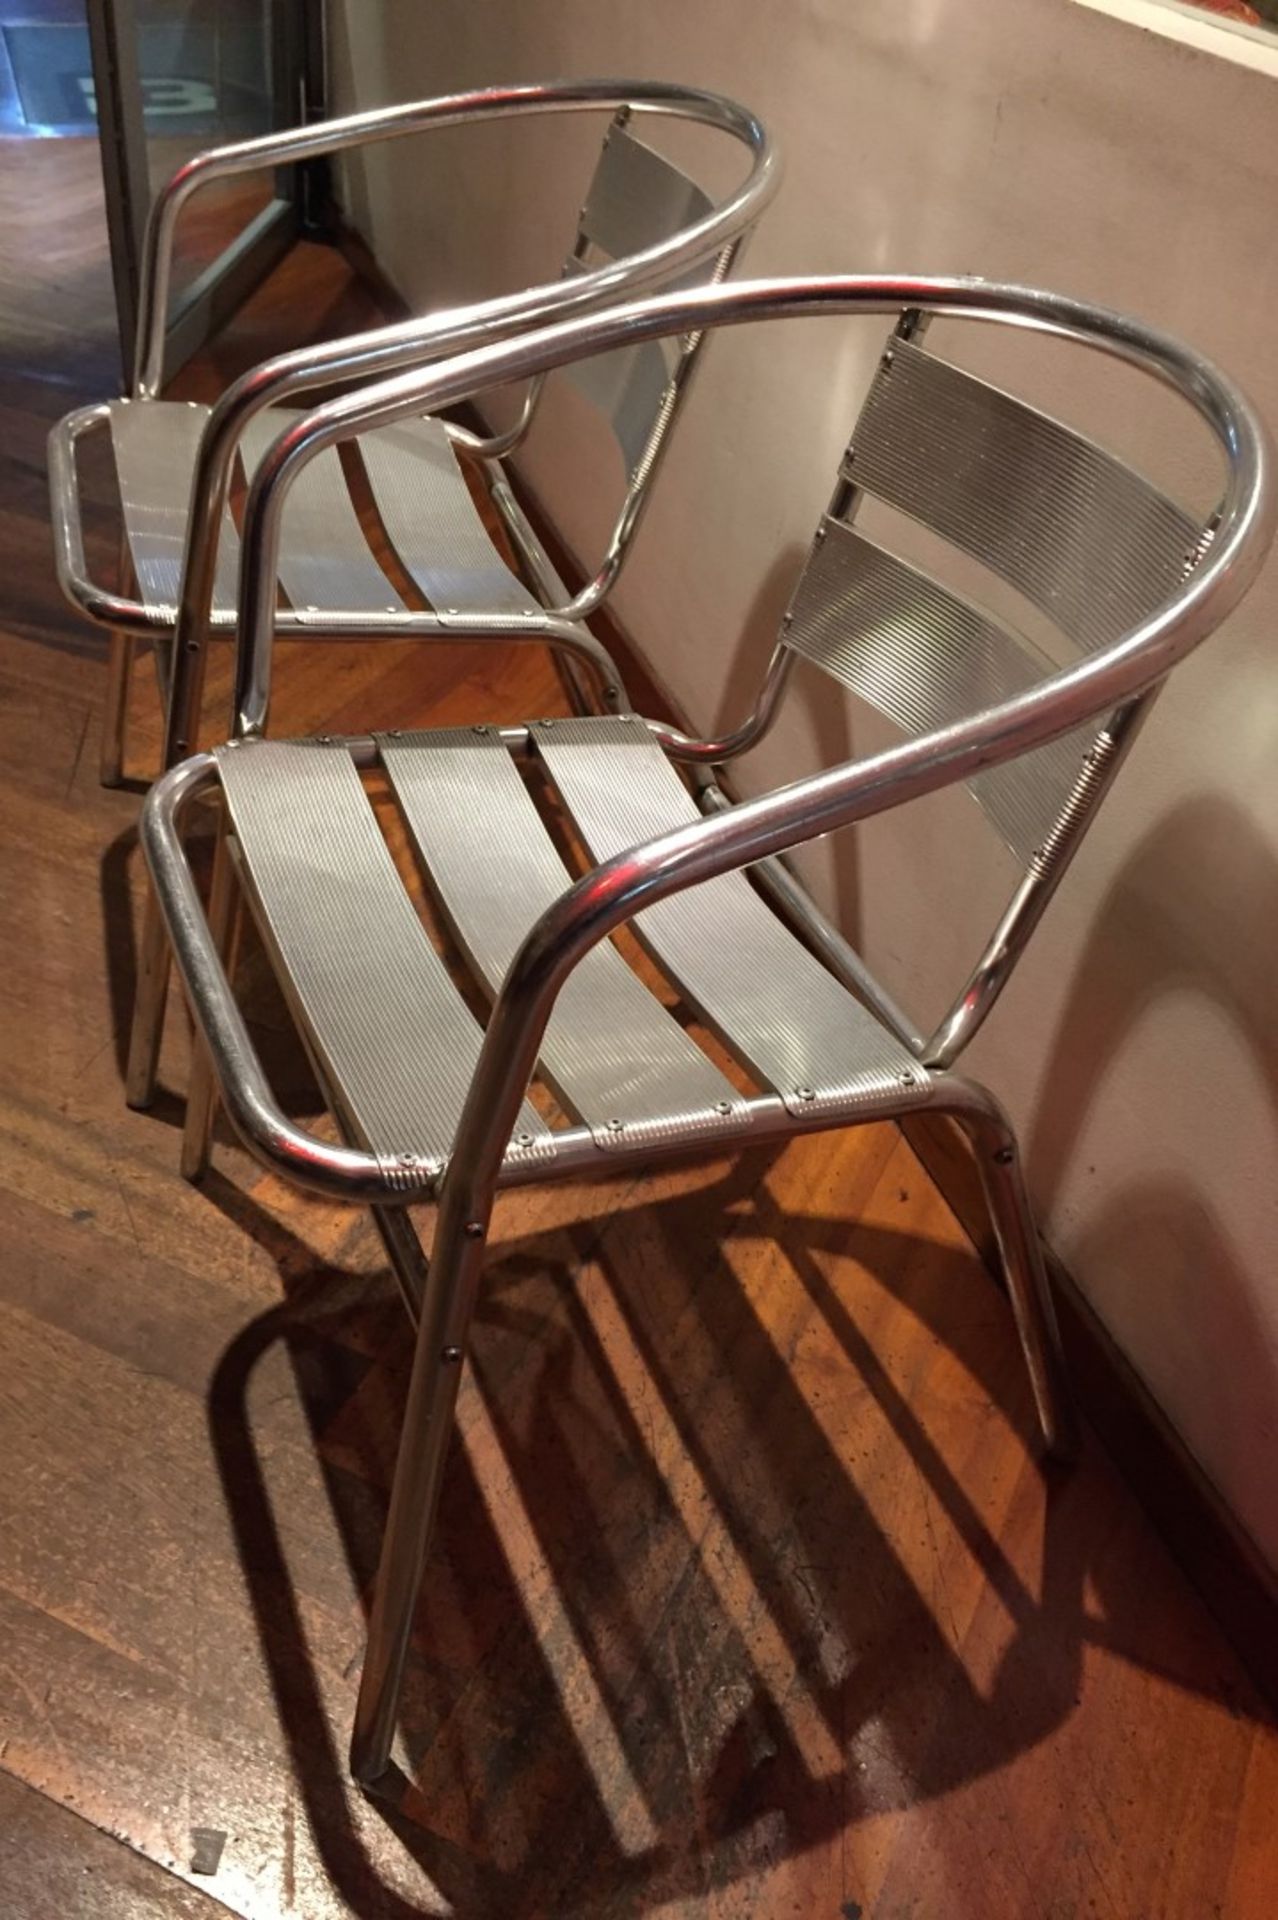 2 x Outdoor Aluminum Garden Chairs - CL188 - Ref GF12 - Location: London W1J - Image 2 of 2